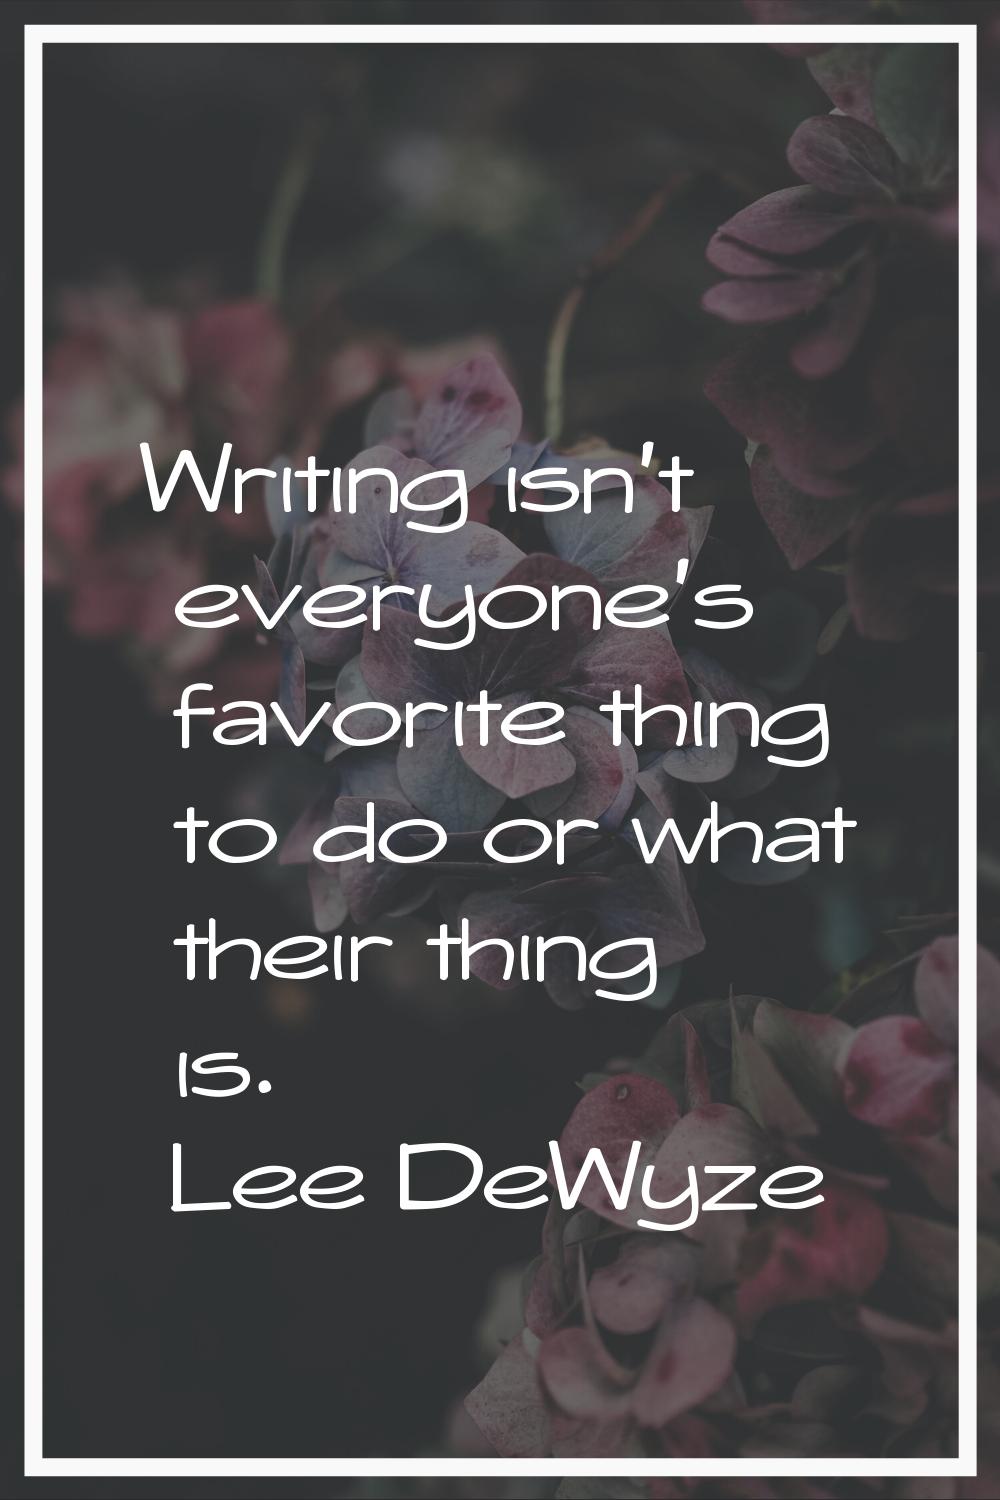 Writing isn't everyone's favorite thing to do or what their thing is.